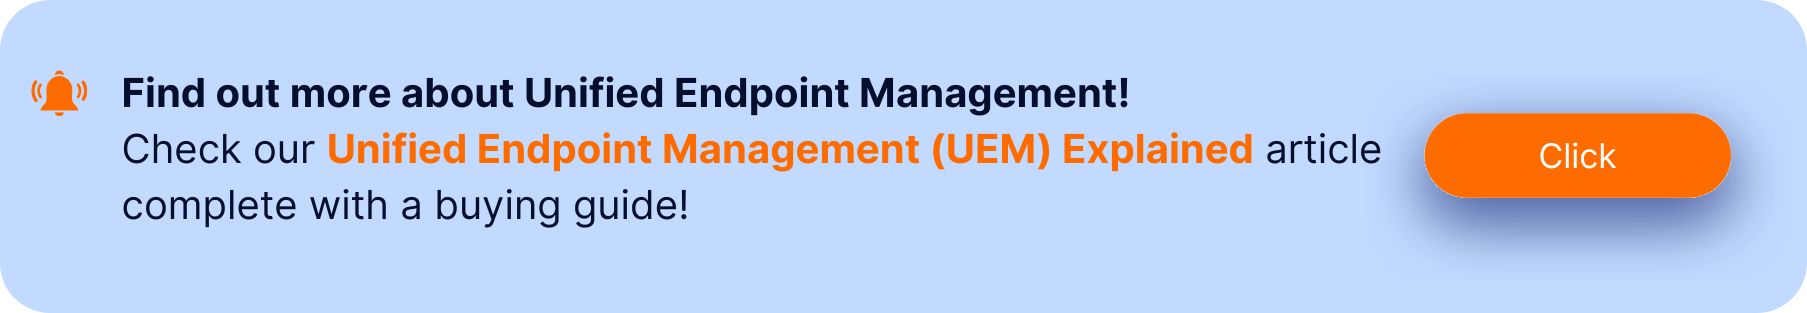 Banner with a notification icon and the text: "Find out more about Unified Endpoint Management! Check our Unified Endpoint Management (UEM) Explained article complete with a buying guide!" A prominent orange "Click" button is on the right side.